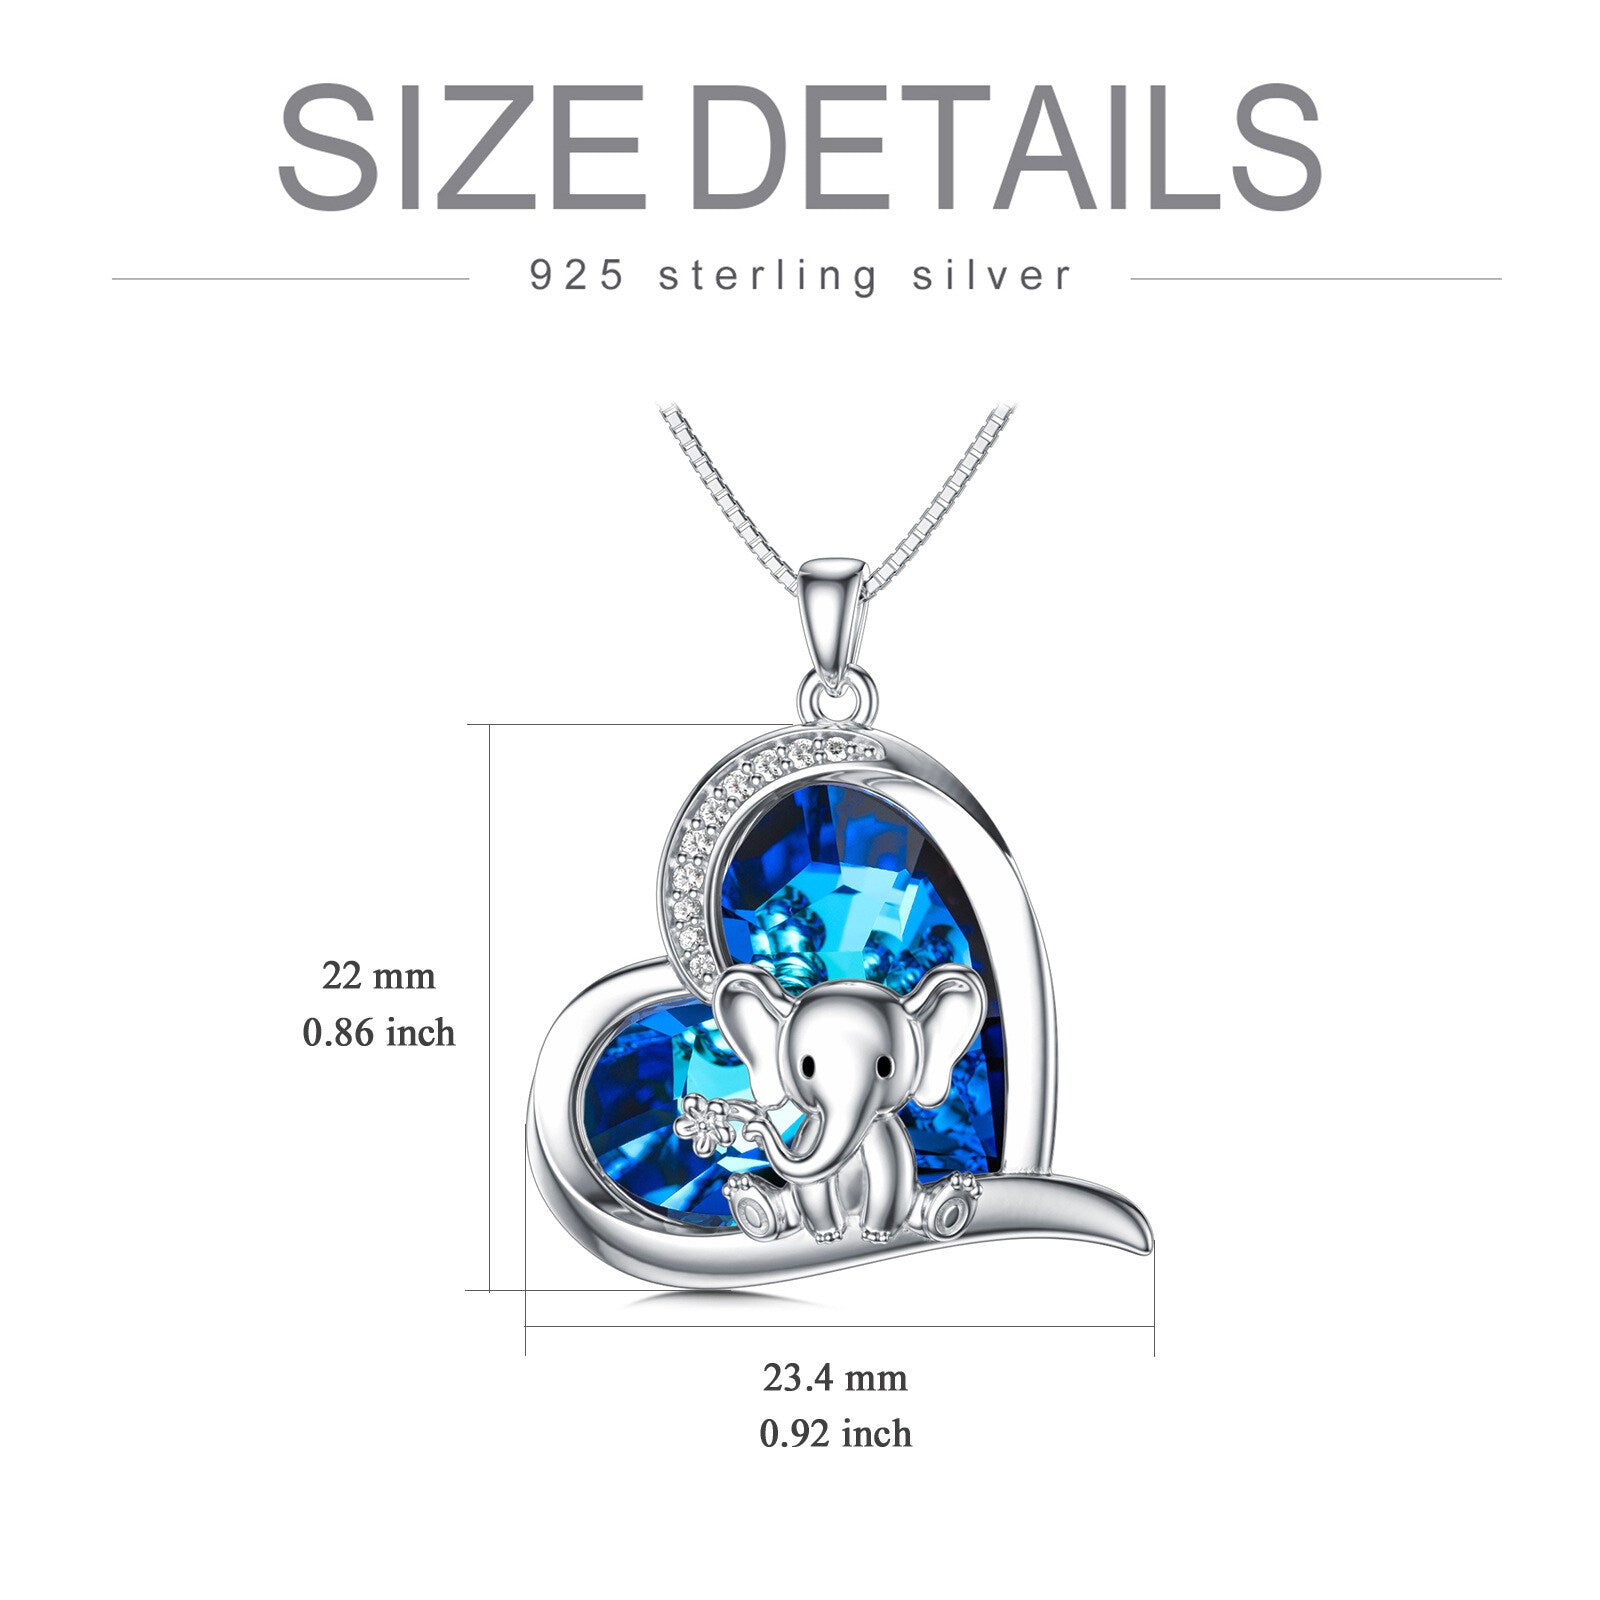 Crystal Heart 925 Sterling Silver Elephant Necklace